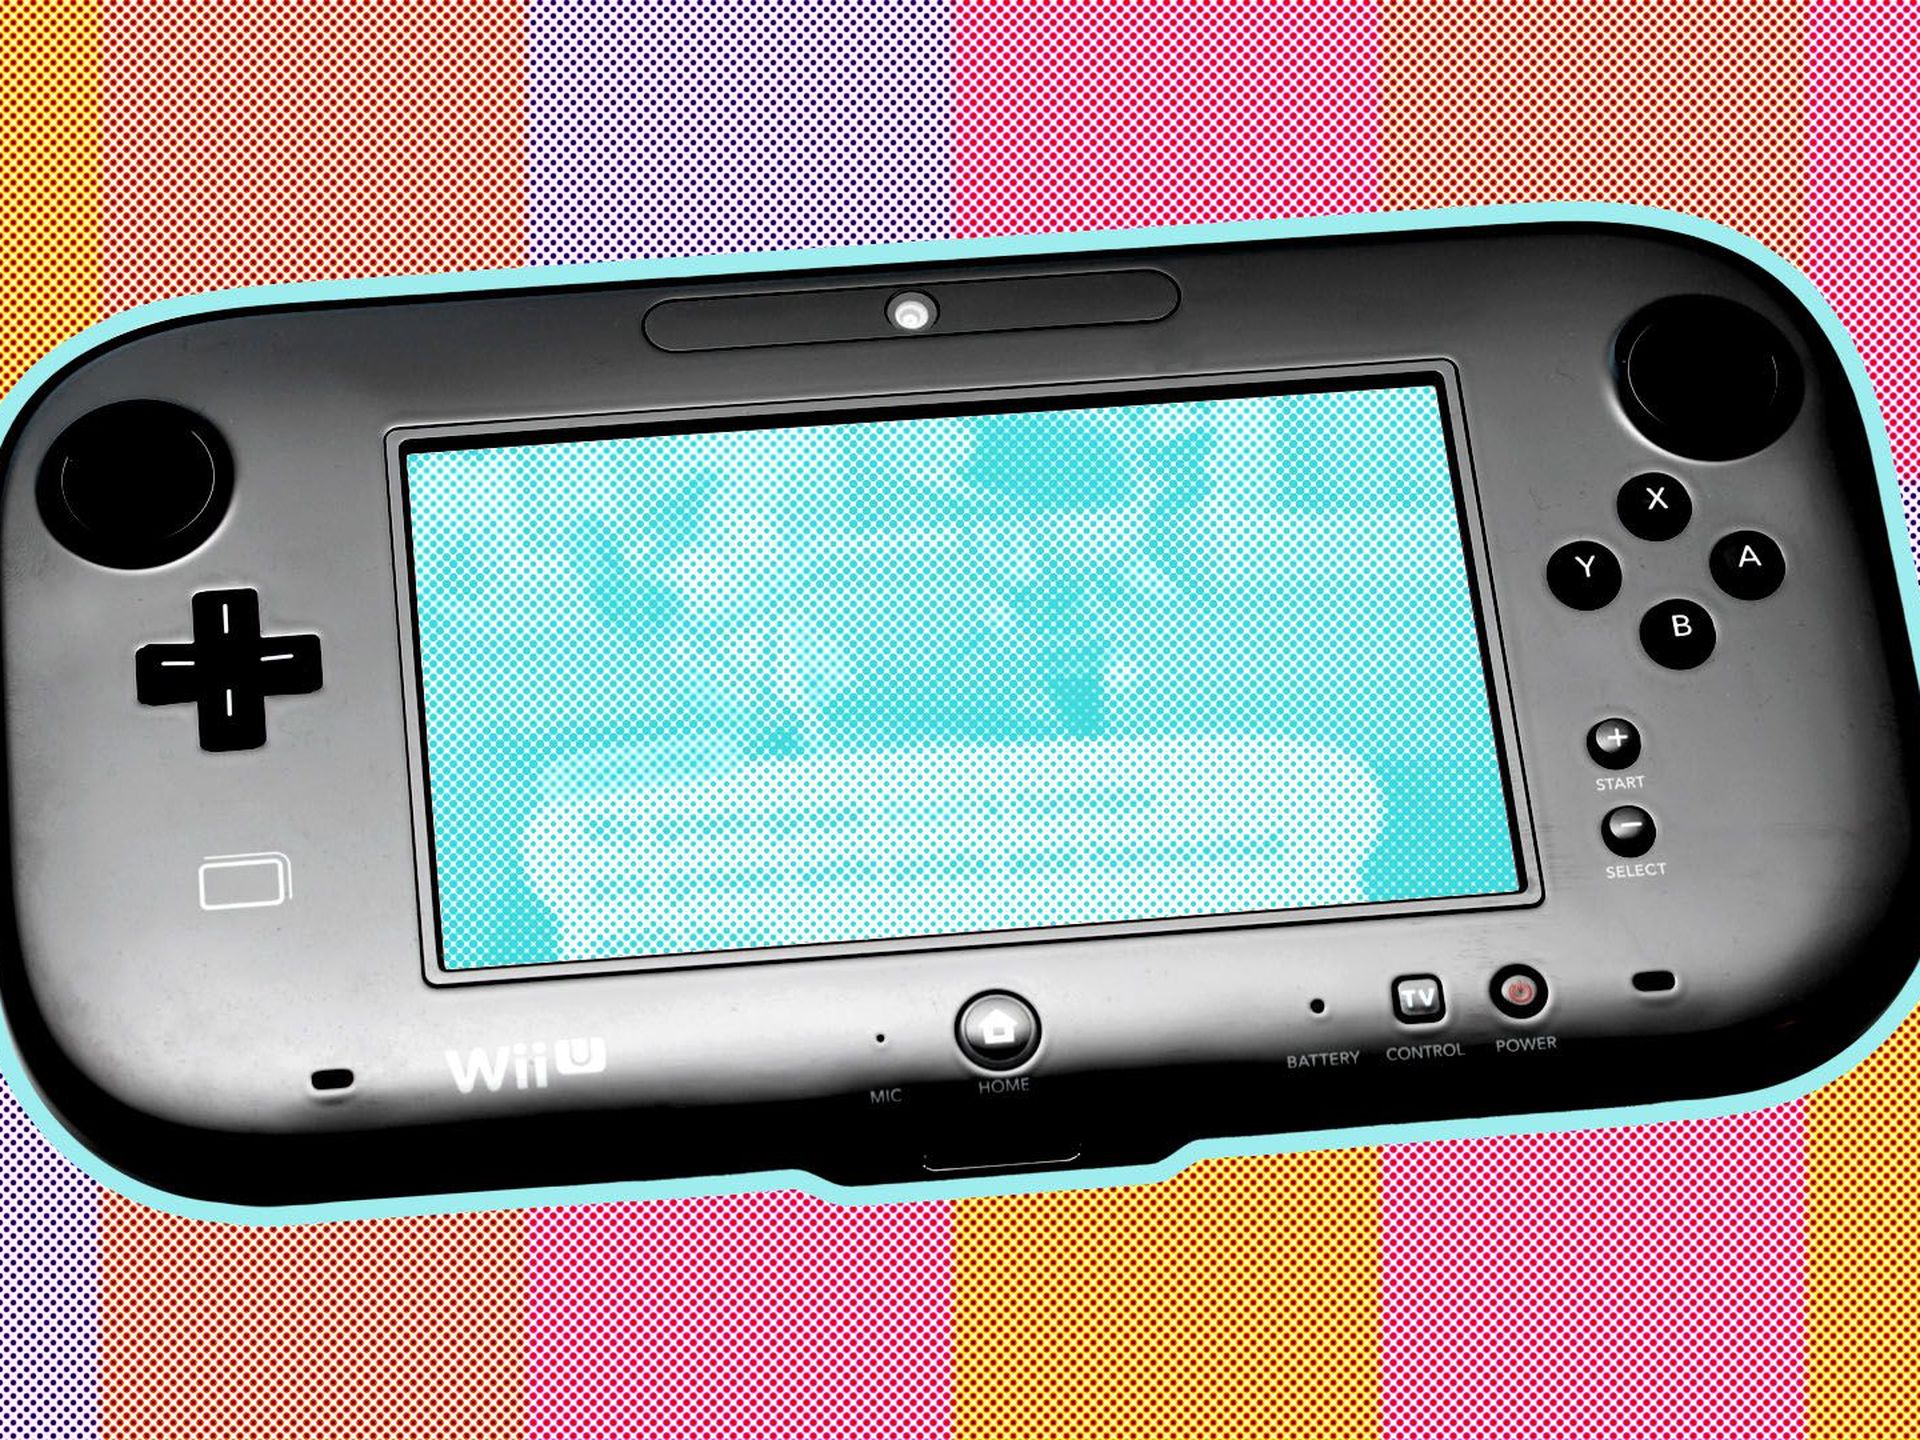 7 Things The Wii U Did Better Than The Switch